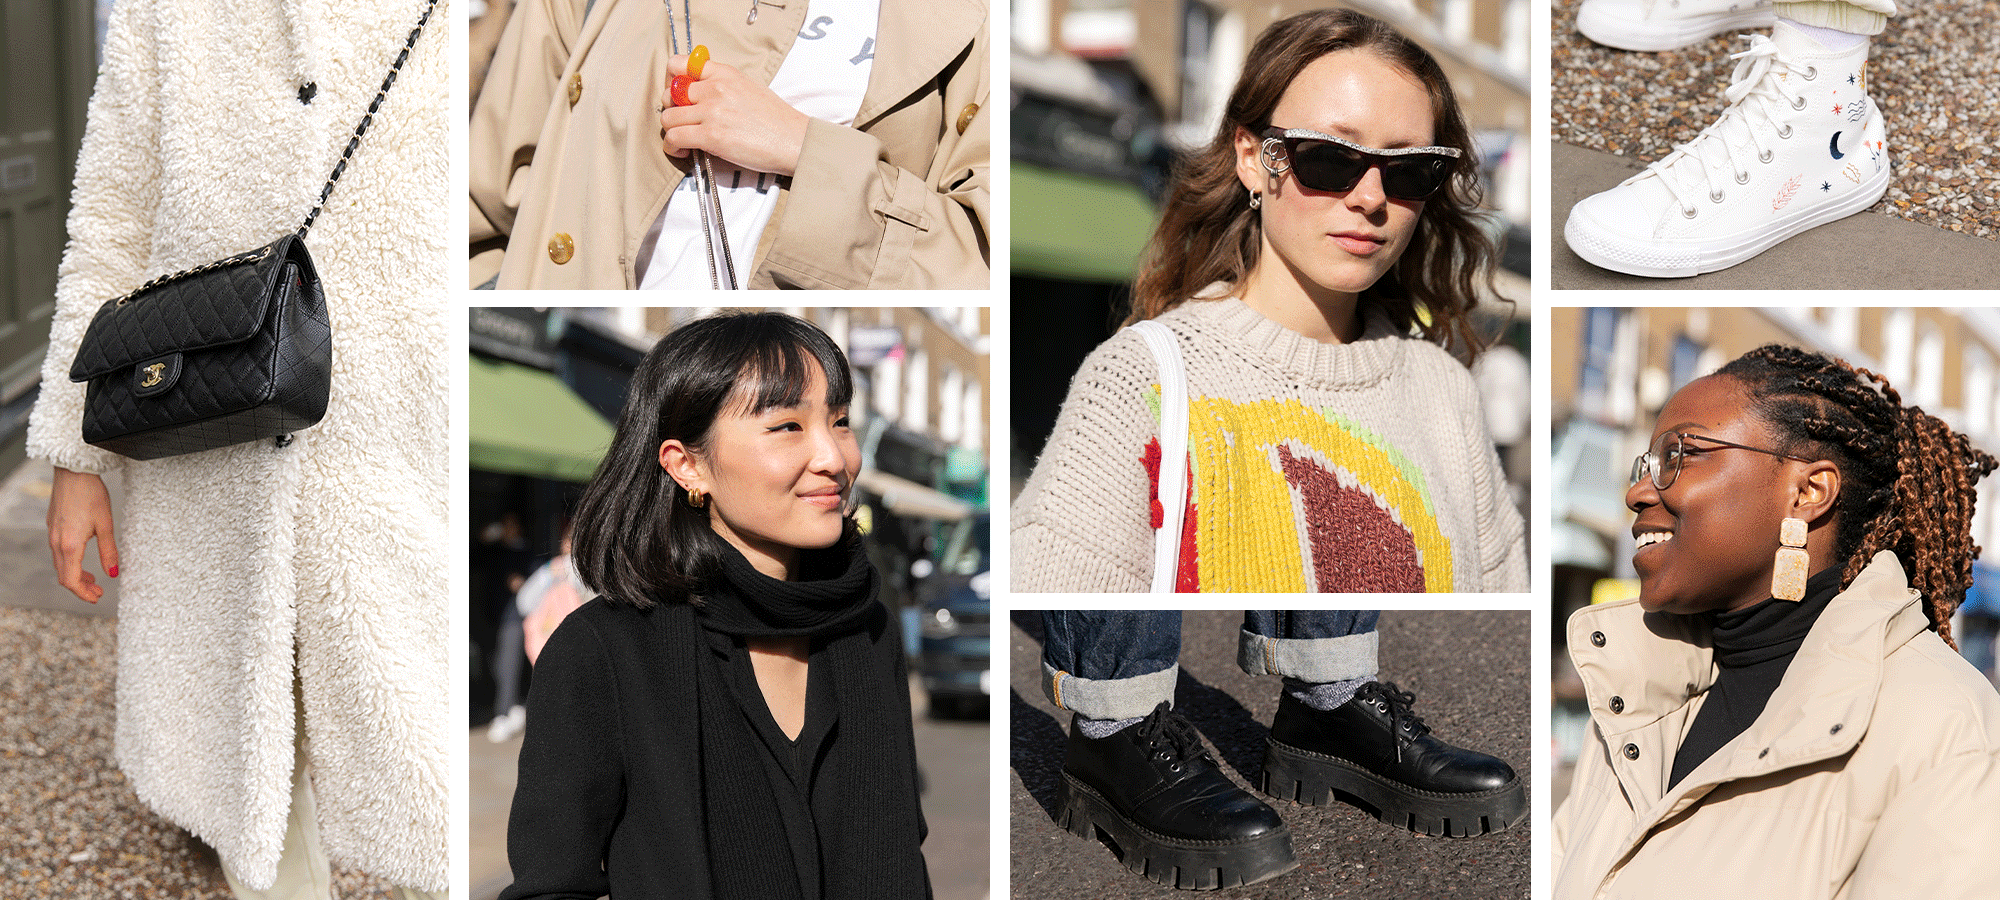 I Went Street Style–Spotting in London and Loved These 13 Autumn Outfits